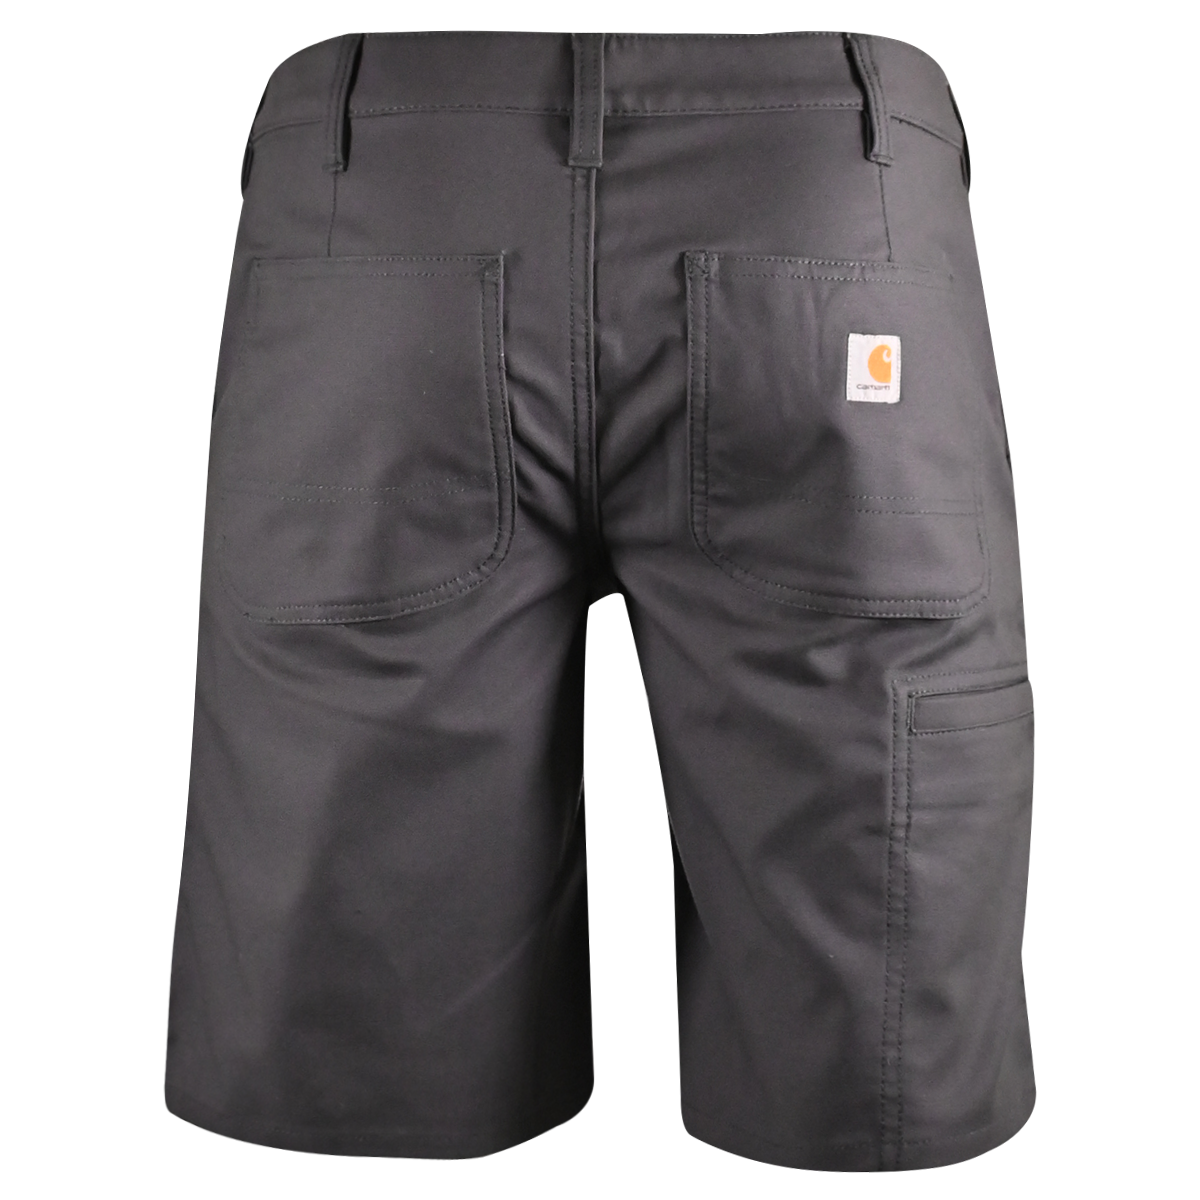 Carhartt Women's Chino Shorts Gravel Rugged Flex Rigby Relaxed Fit